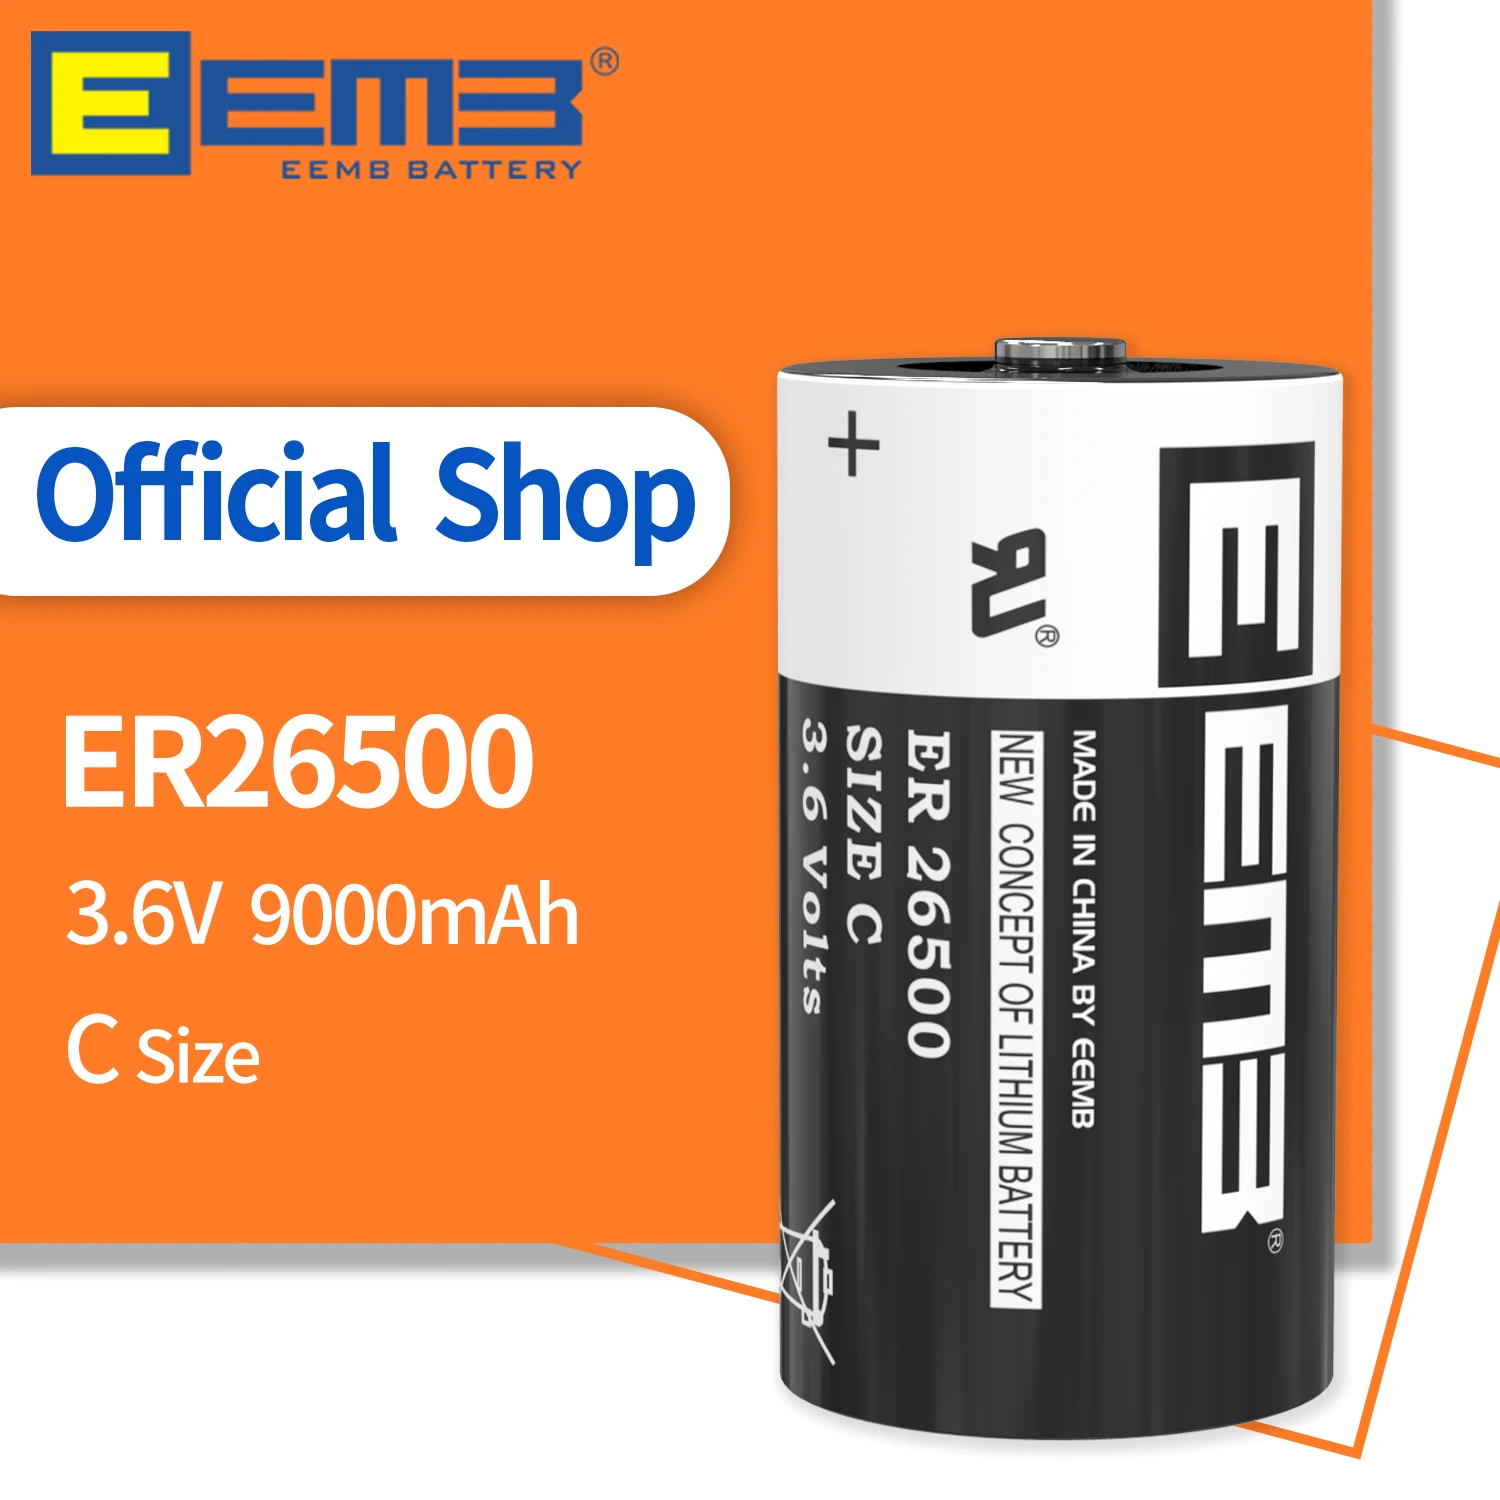 

EEMB 3.6V Lithium Battery ER26500 C Size Batteries 9000mAh Non-Rechargeable Battery for Water Meter Window Sensor Home Monitor